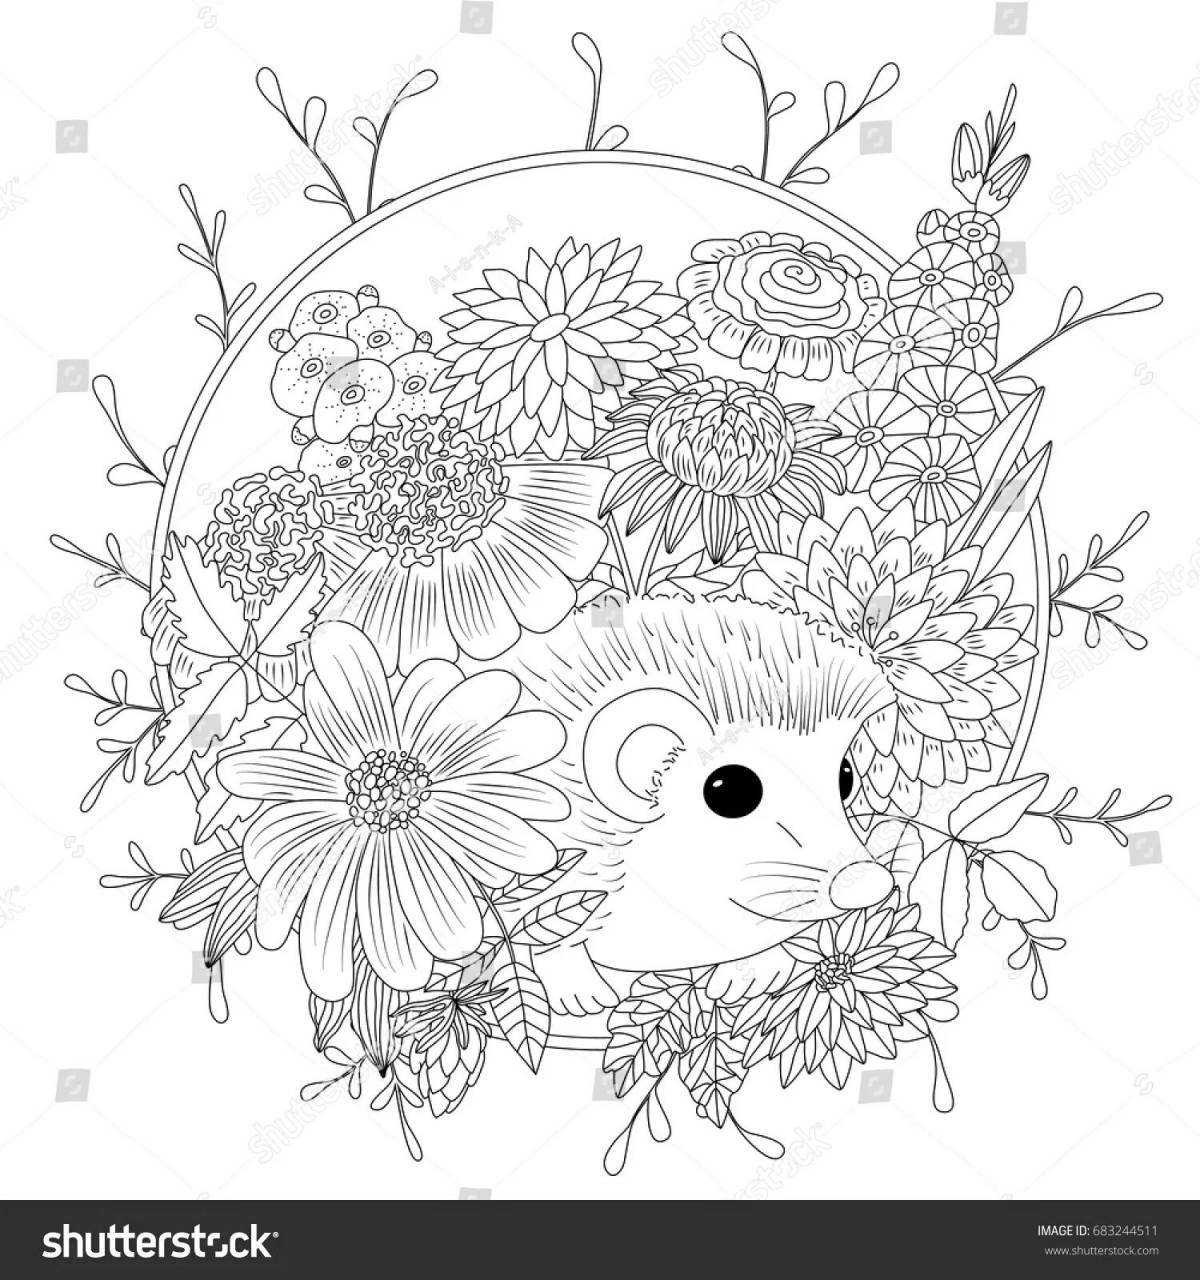 Colorful anti-stress coloring hedgehog